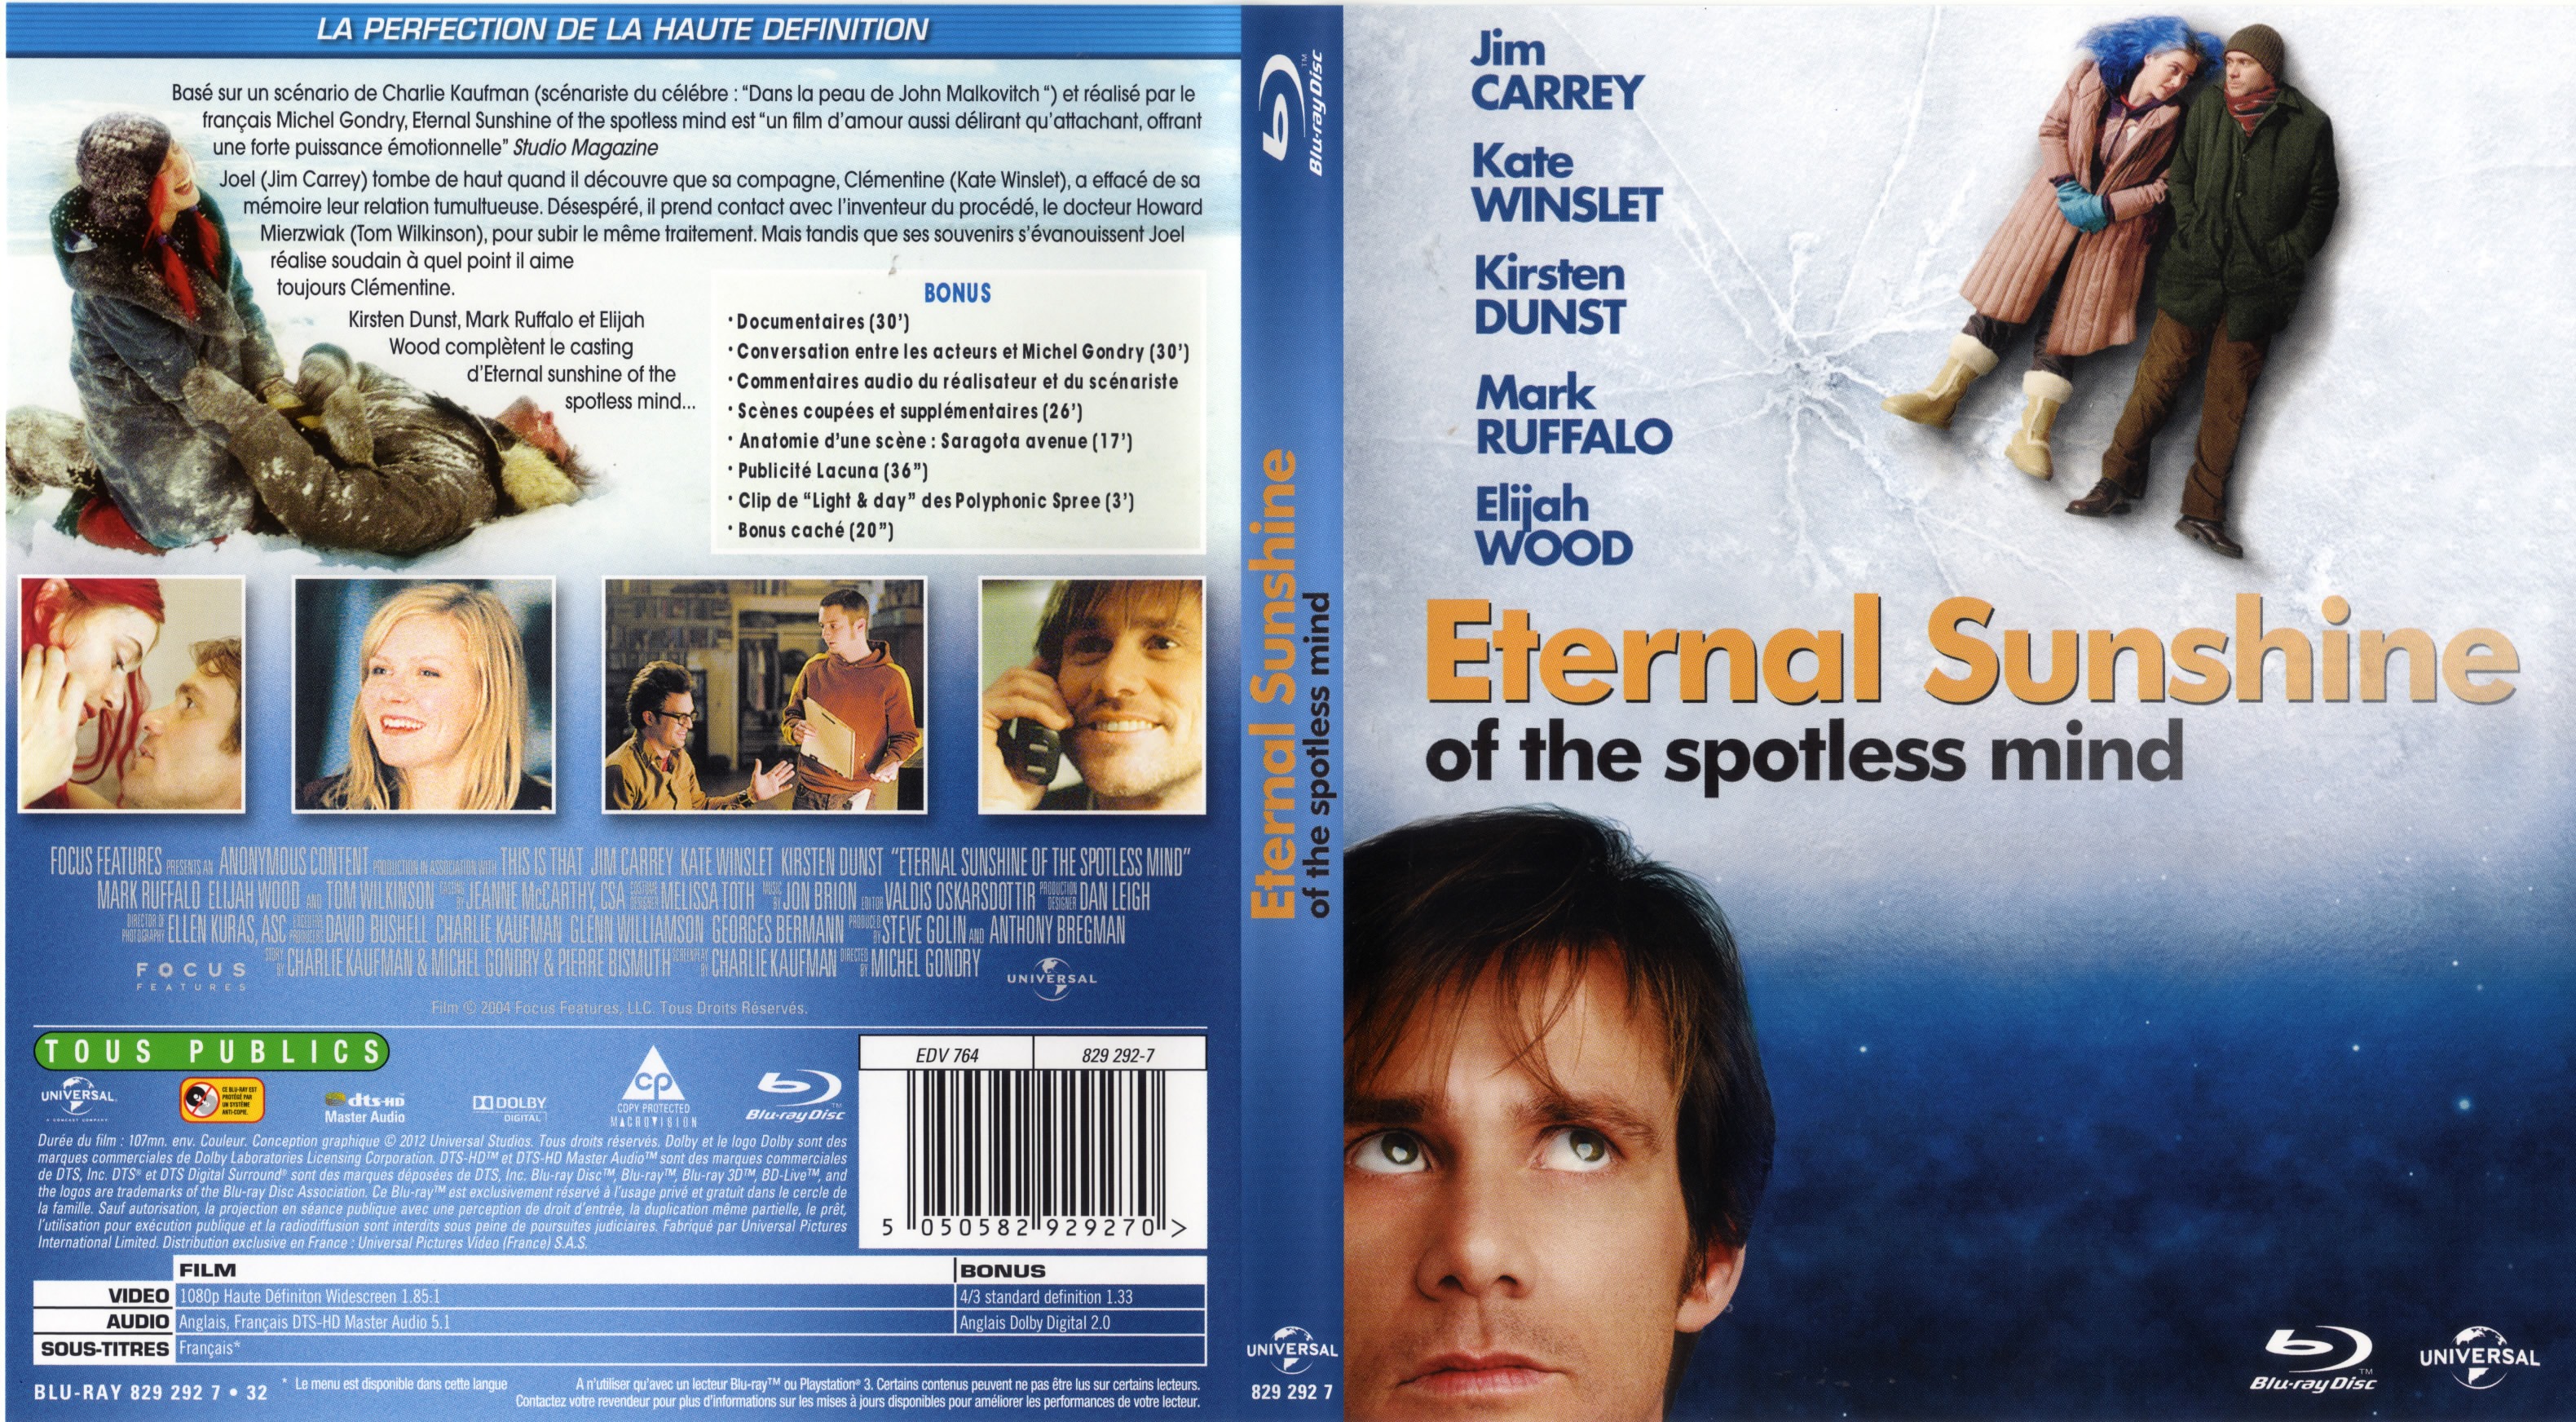 Jaquette DVD Eternal Sunshine of the Spotless Mind (BLU-RAY)